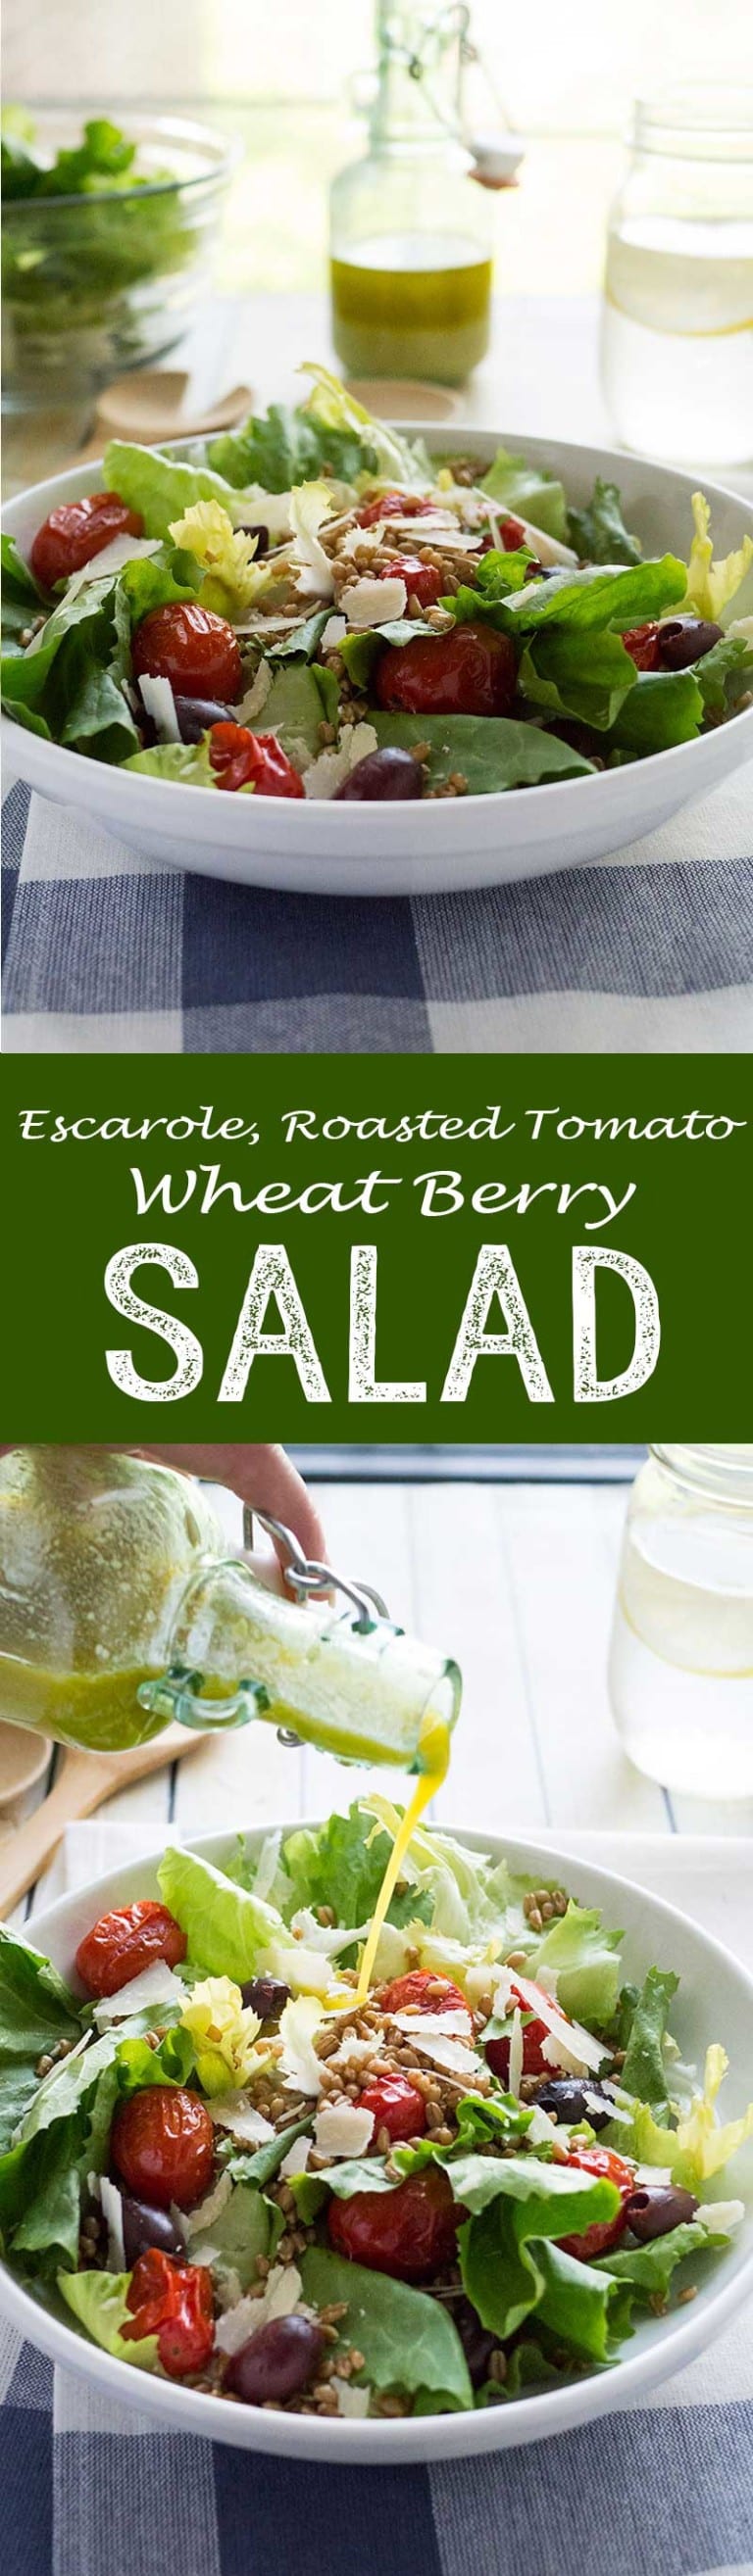 Escarole, Roasted Tomato and Wheat Berry Salad - Easy Peasy Meals